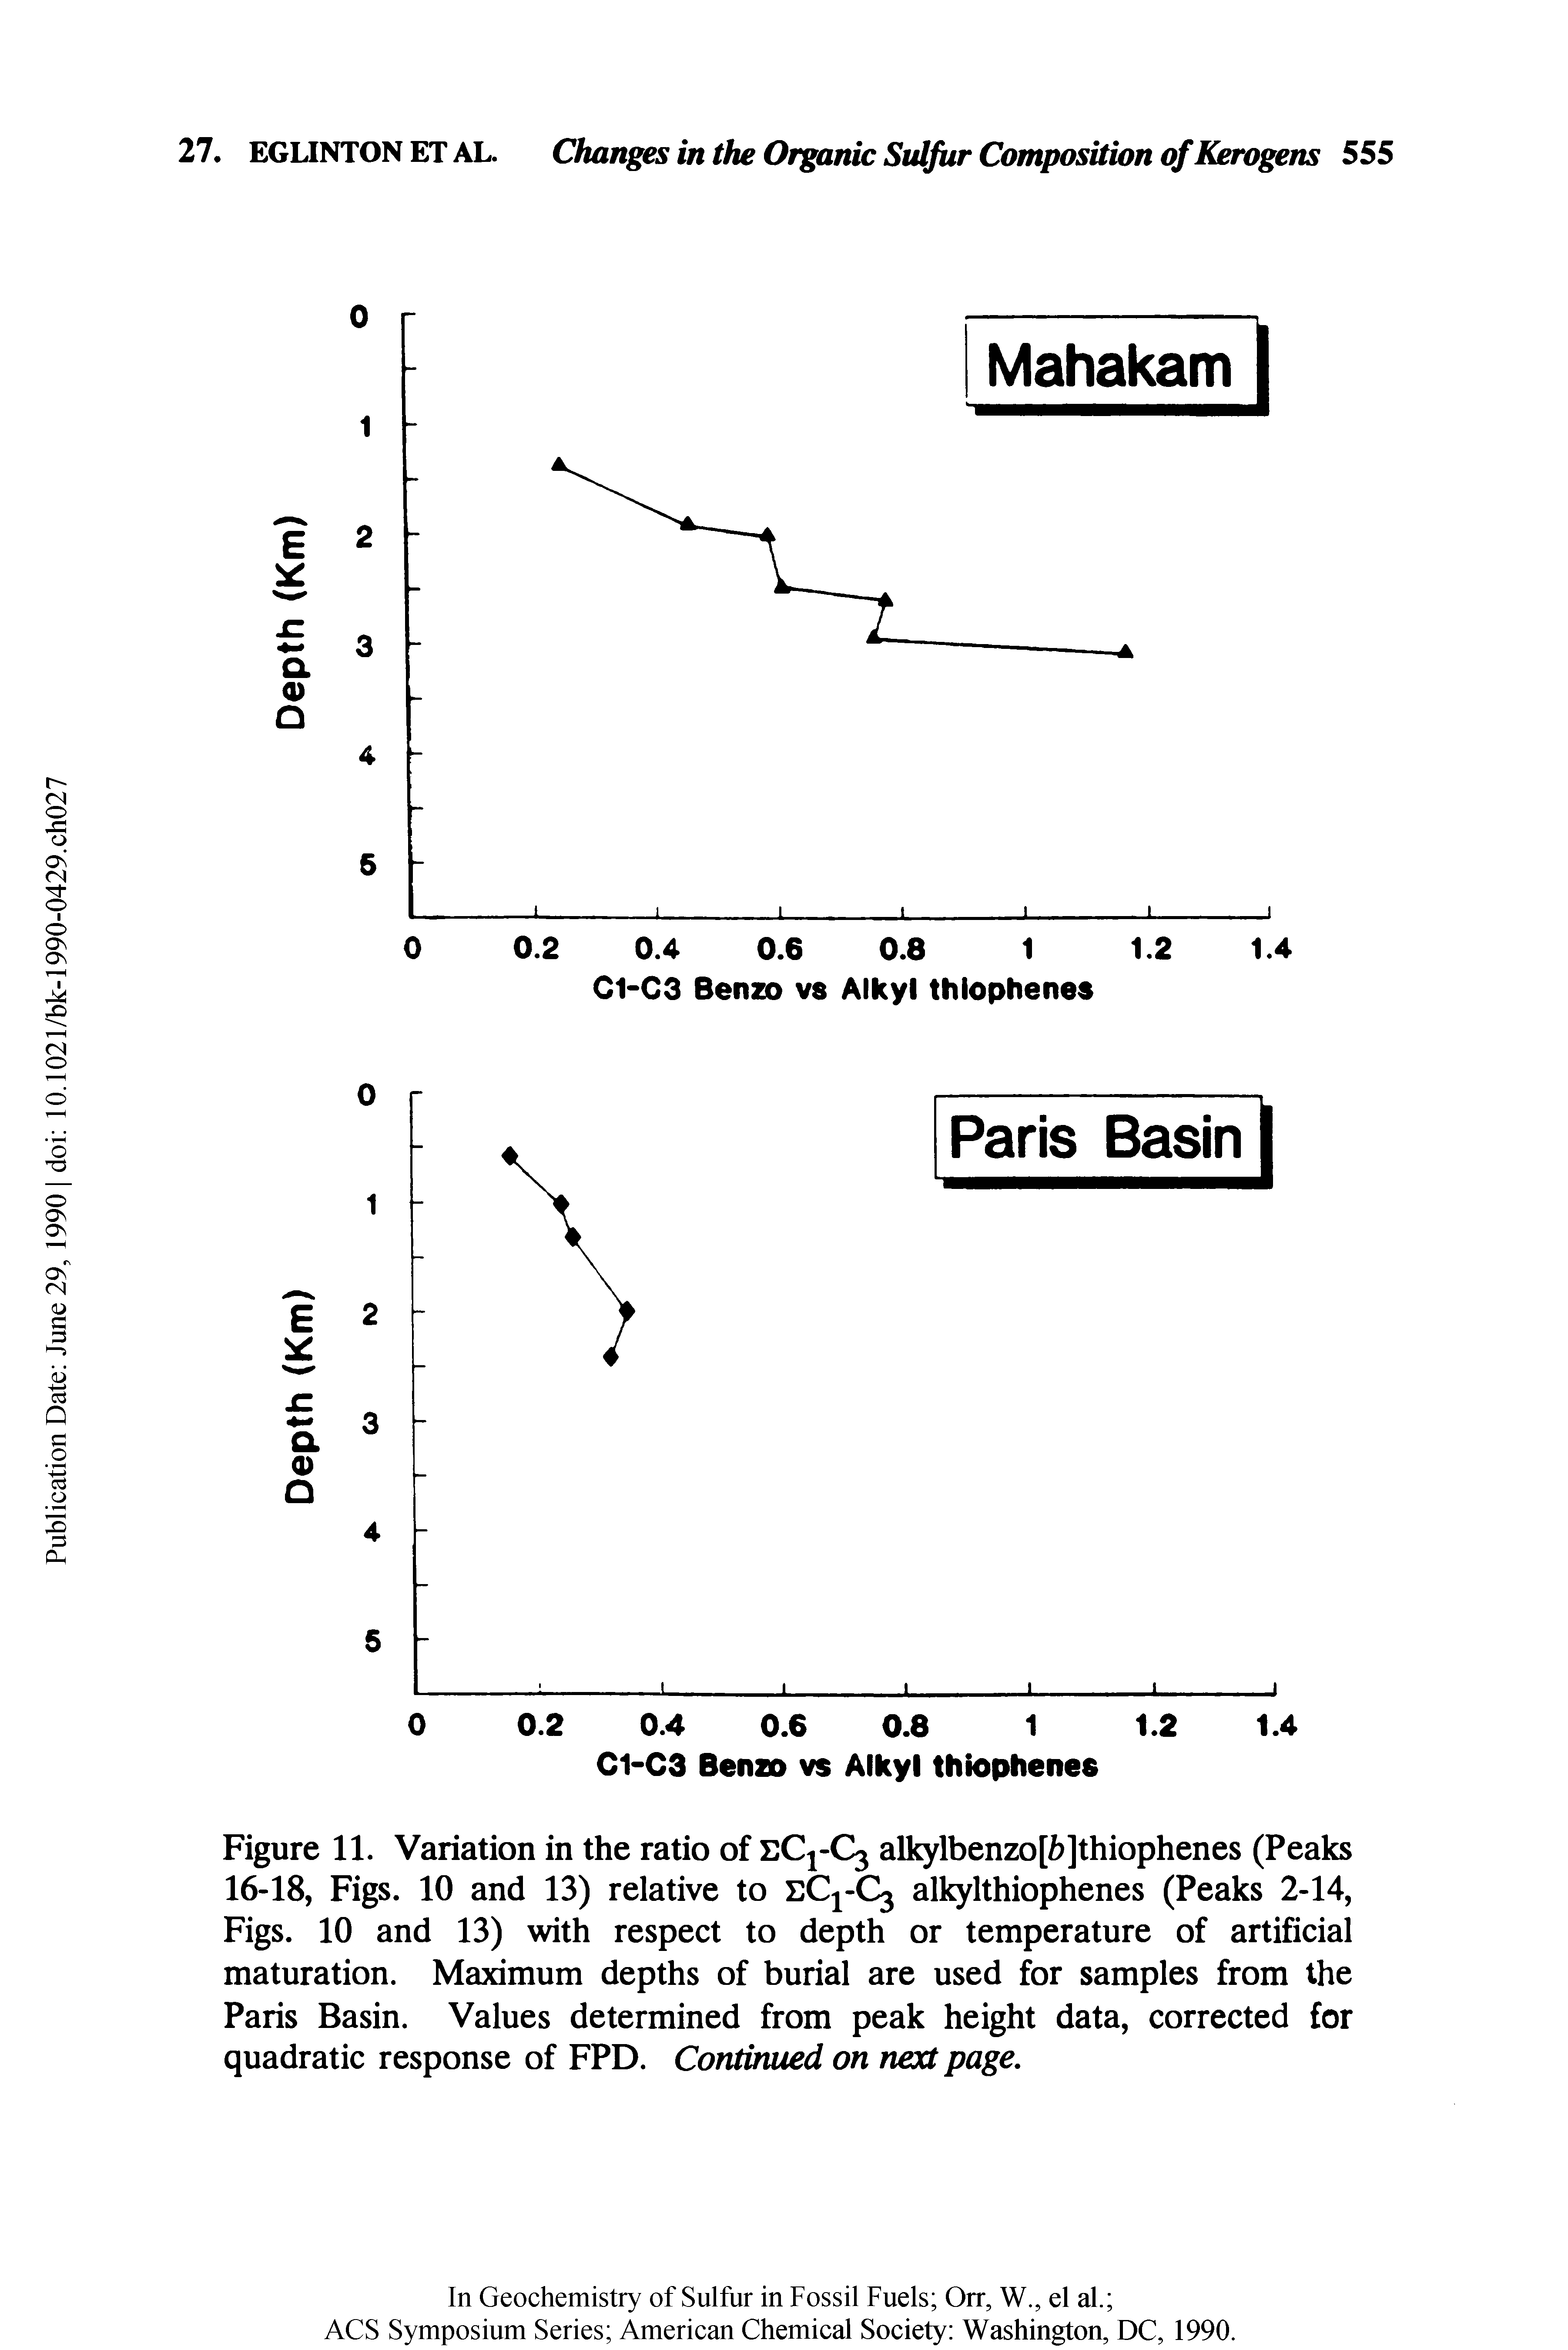 Figure 11. Variation in the ratio of eCj-C alkylbenzo[fr]thiophenes (Peaks 16-18, Figs. 10 and 13) relative to eC1-C3 alkylthiophenes (Peaks 2-14, Figs. 10 and 13) with respect to depth or temperature of artificial maturation. Maximum depths of burial are used for samples from the Paris Basin. Values determined from peak height data, corrected for quadratic response of FPD. Continued on next page.